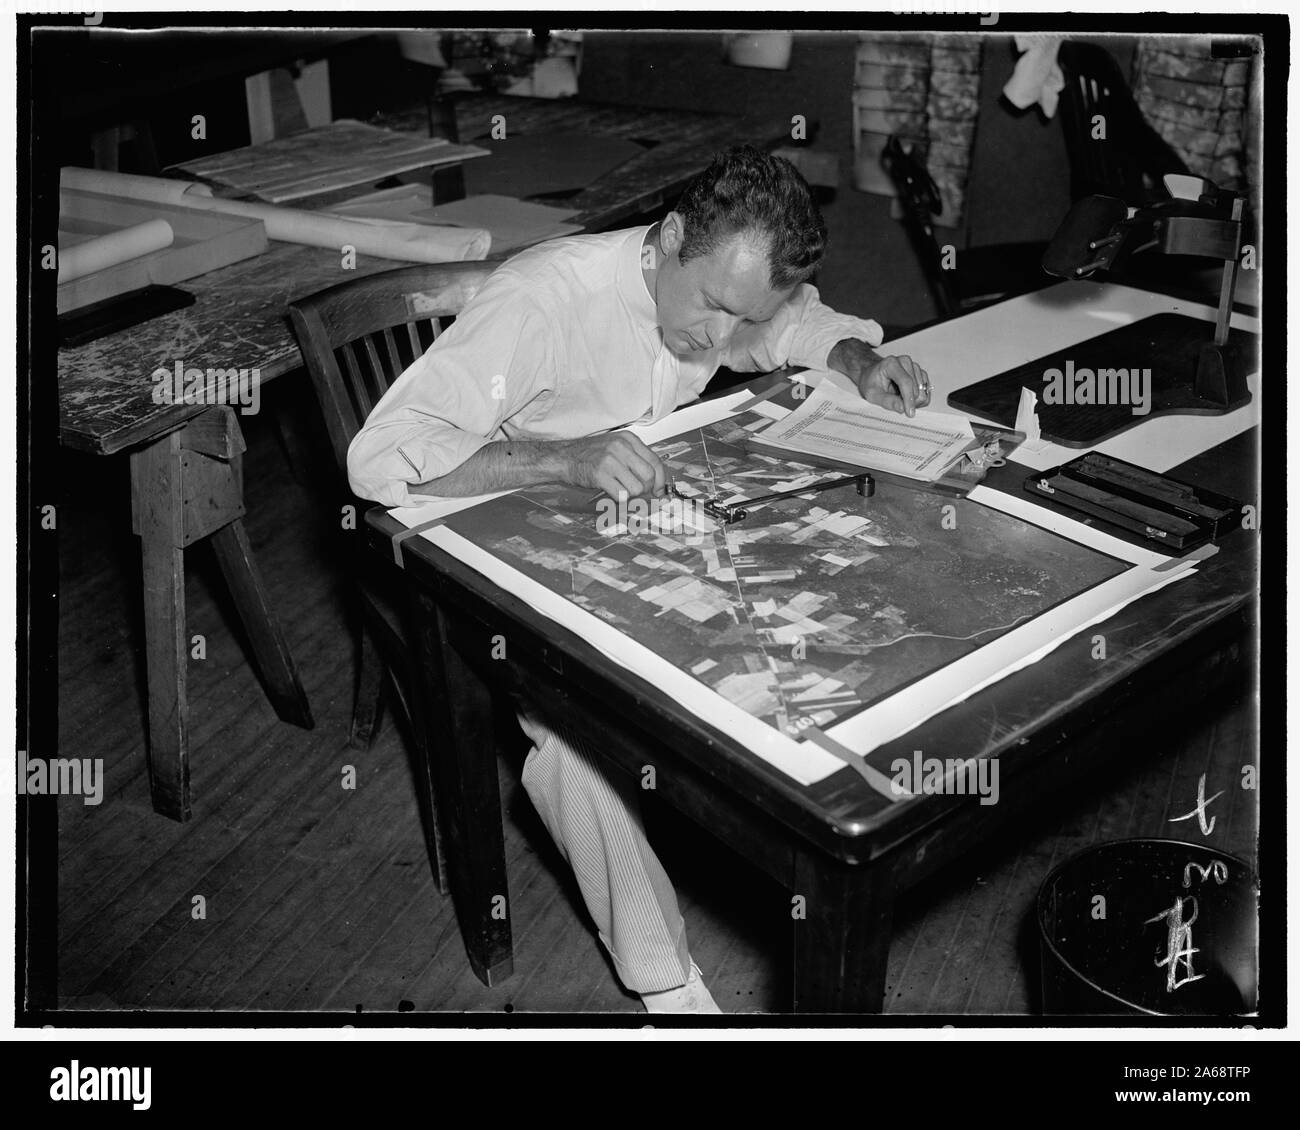 Working of $3,000,000 map. (2) C.E. Kowalozyk, AAA worker, using a planimetor, which measures the exact acreage in each section of land surface photographed, 7/28/37 Stock Photo